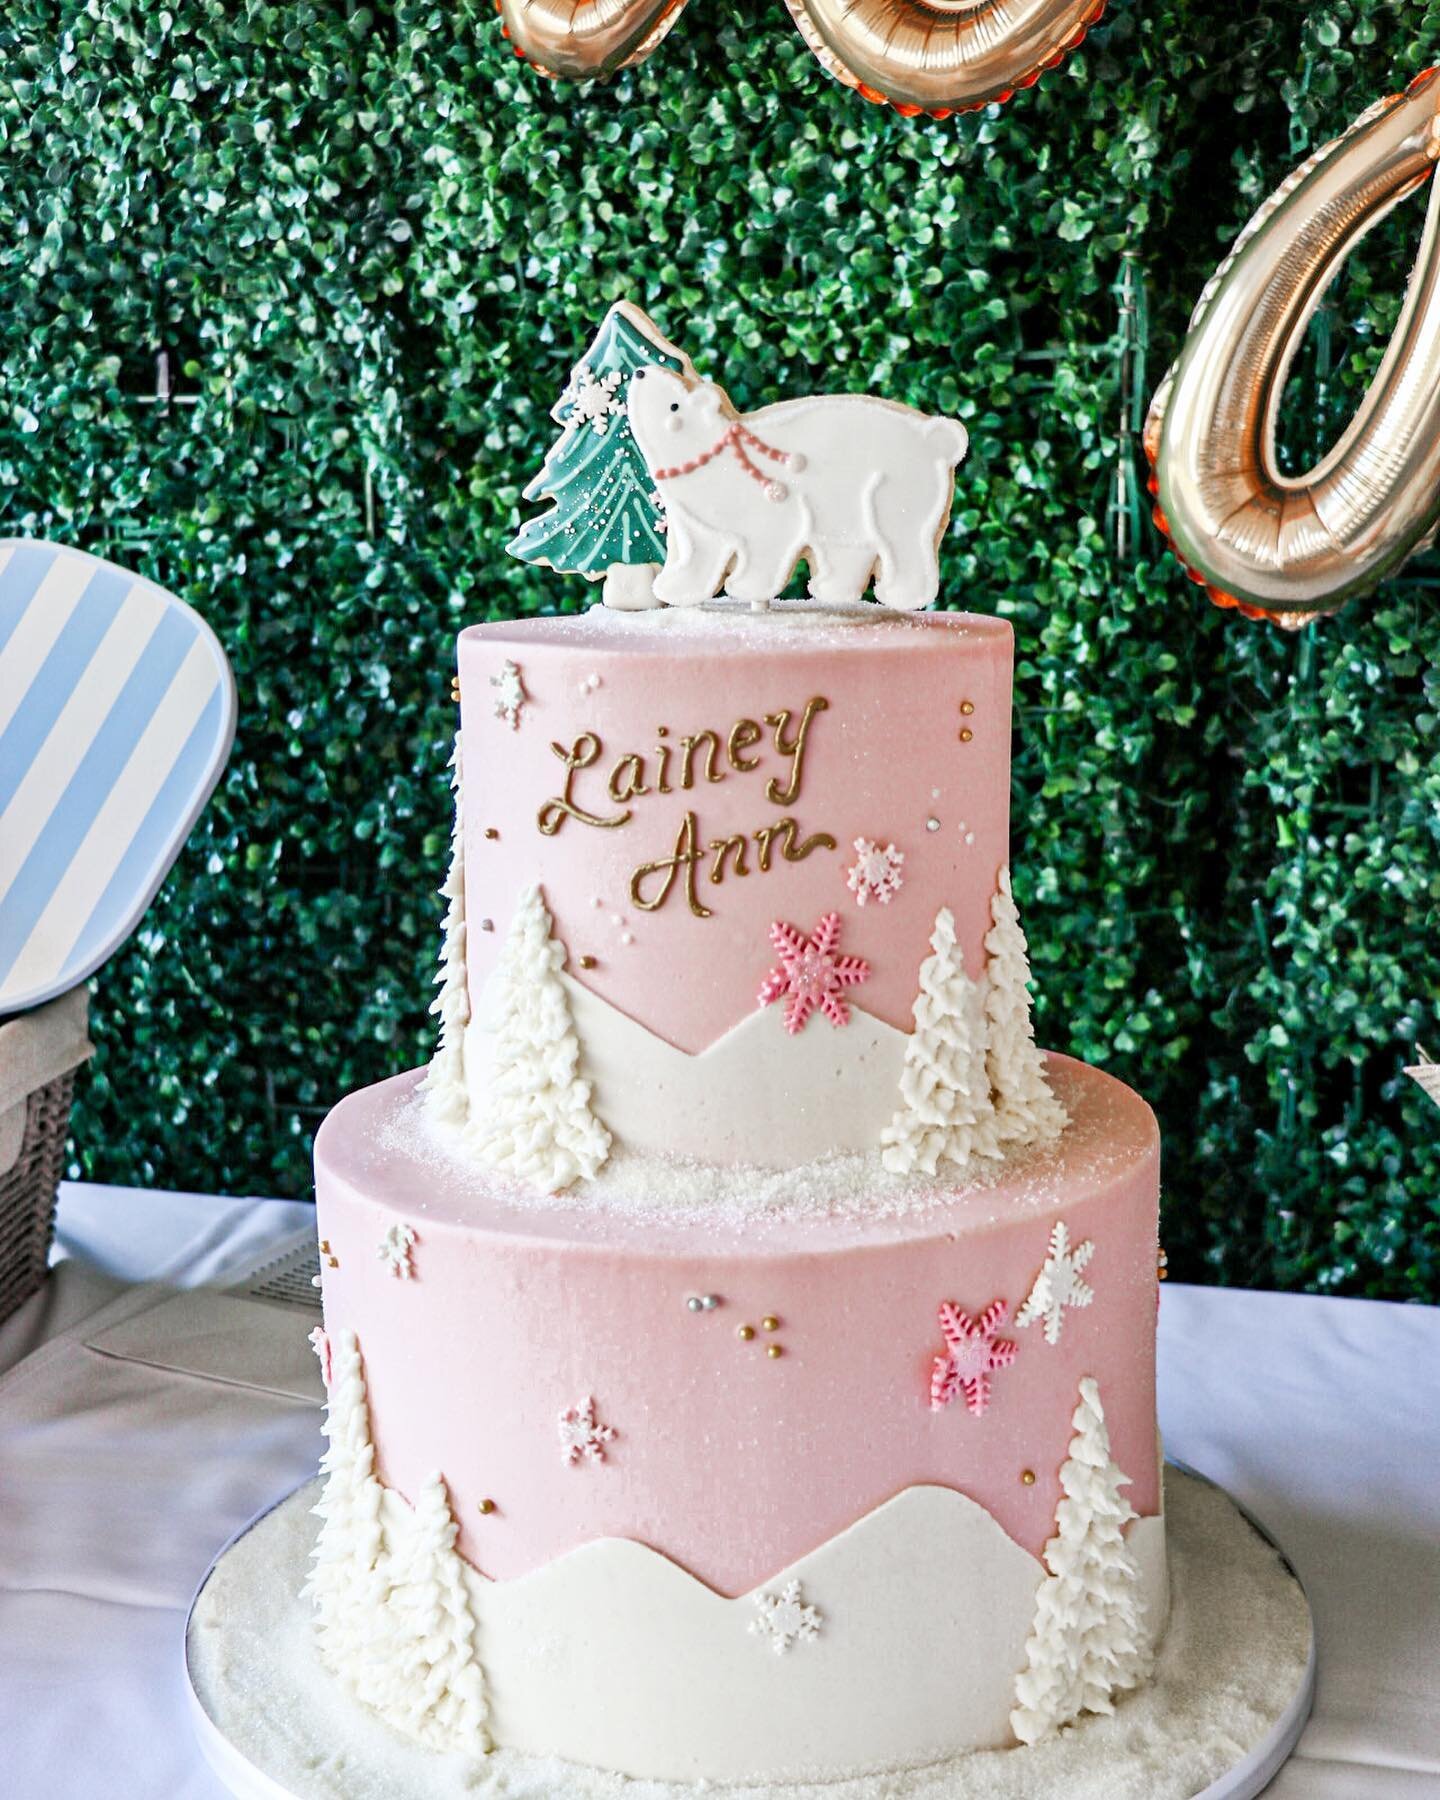 Celebrate life&rsquo;s precious moments with us! 🍼✨ Book your next baby shower at our stunning venue by clicking the link in our bio! Creating memories that last a lifetime! #BabyShowerVenue #BookWithUs #wearesnowexcited #babyshower